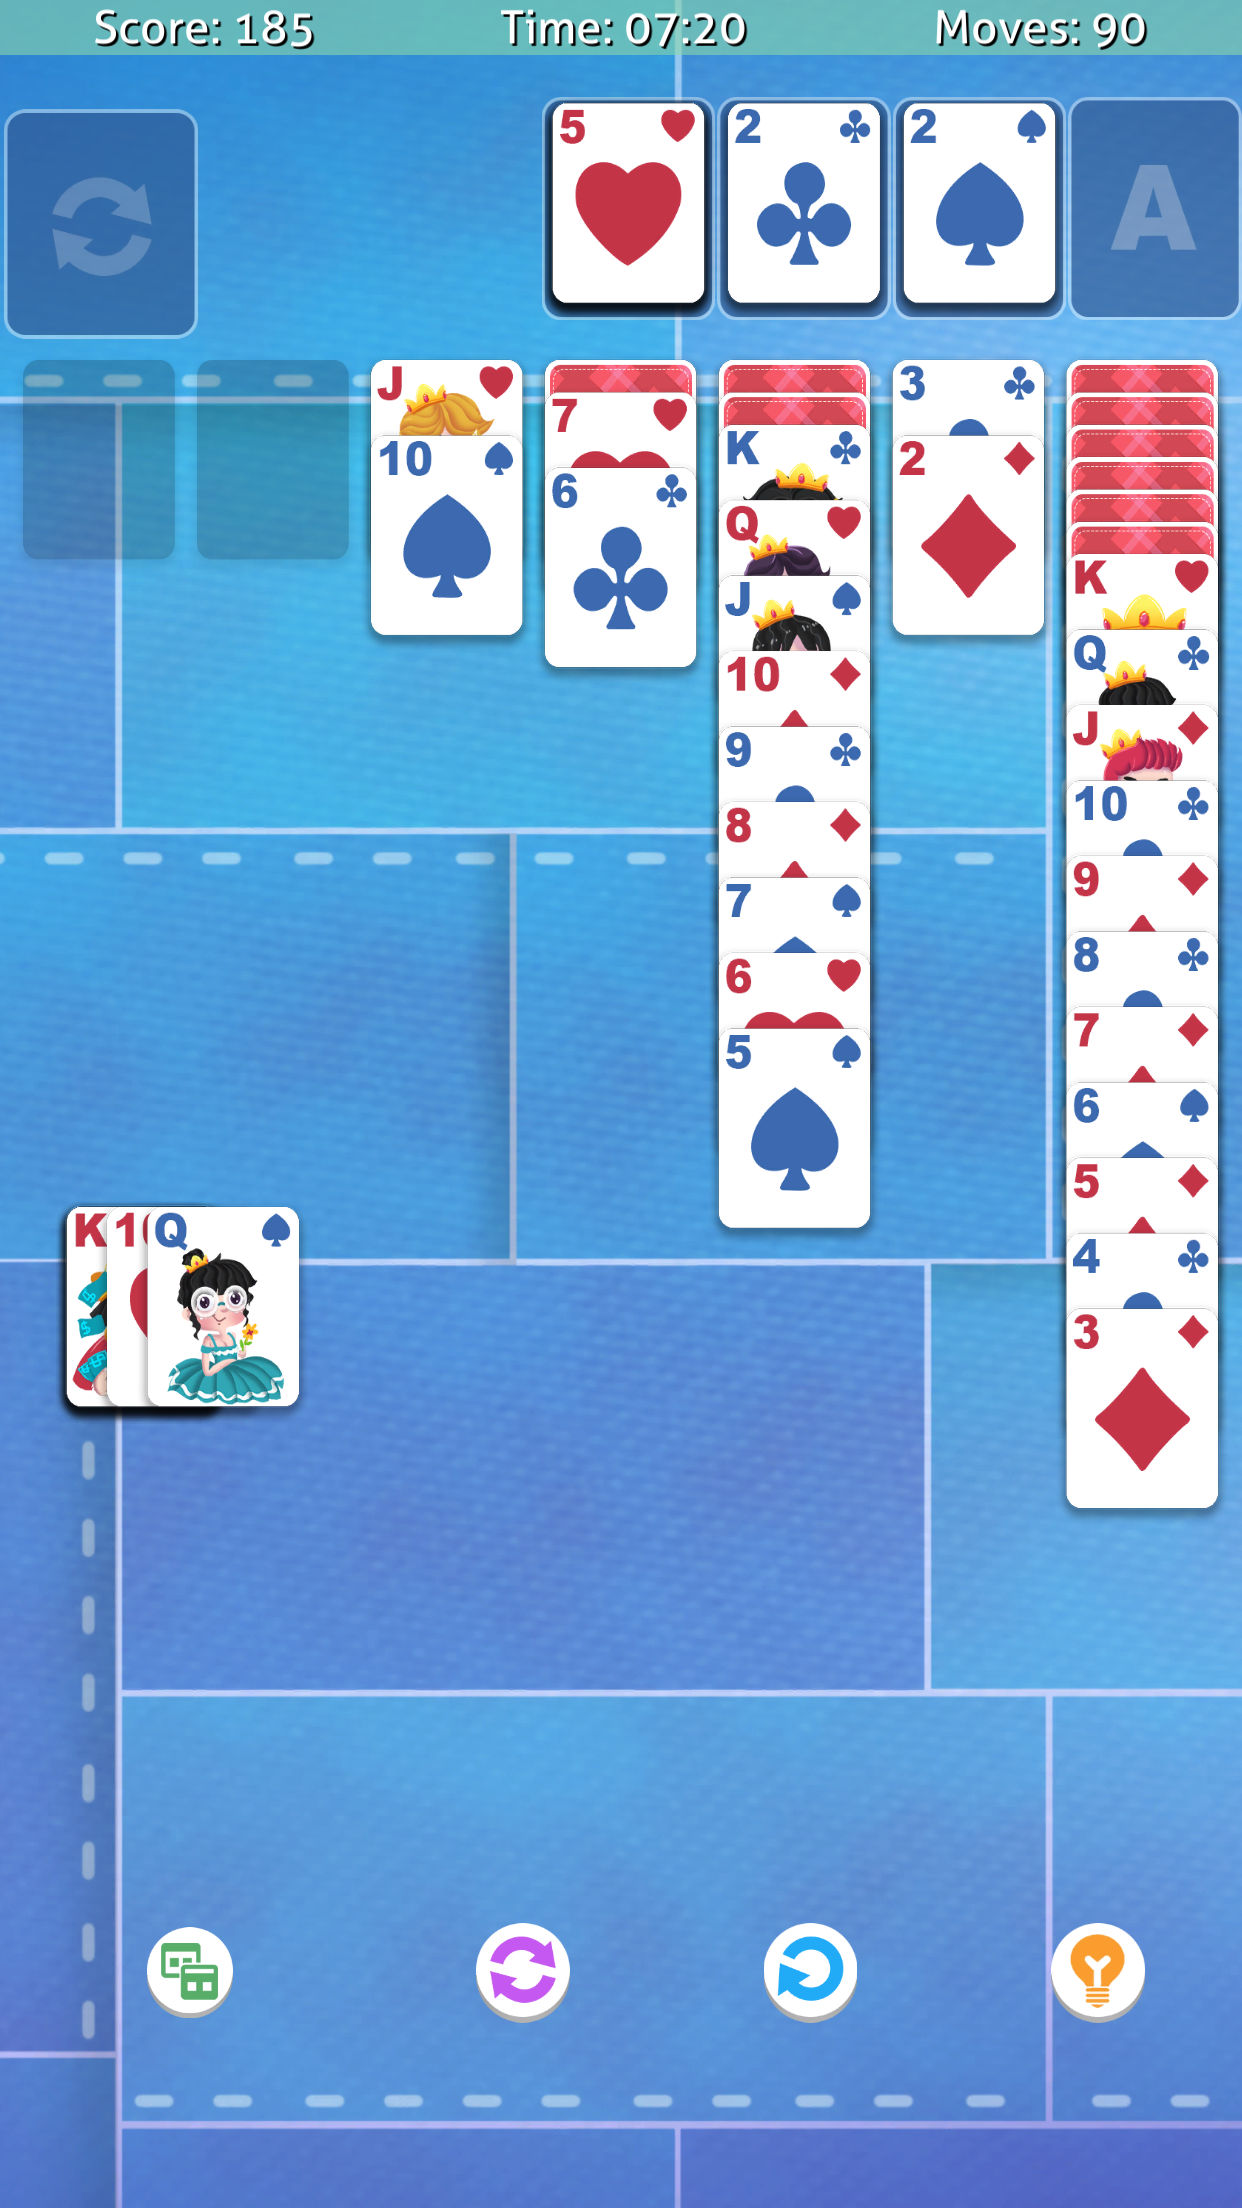 Solitaire #1 / Solitaire Kings Ultimate Game Apple AppStore - Google Play Store Image 3